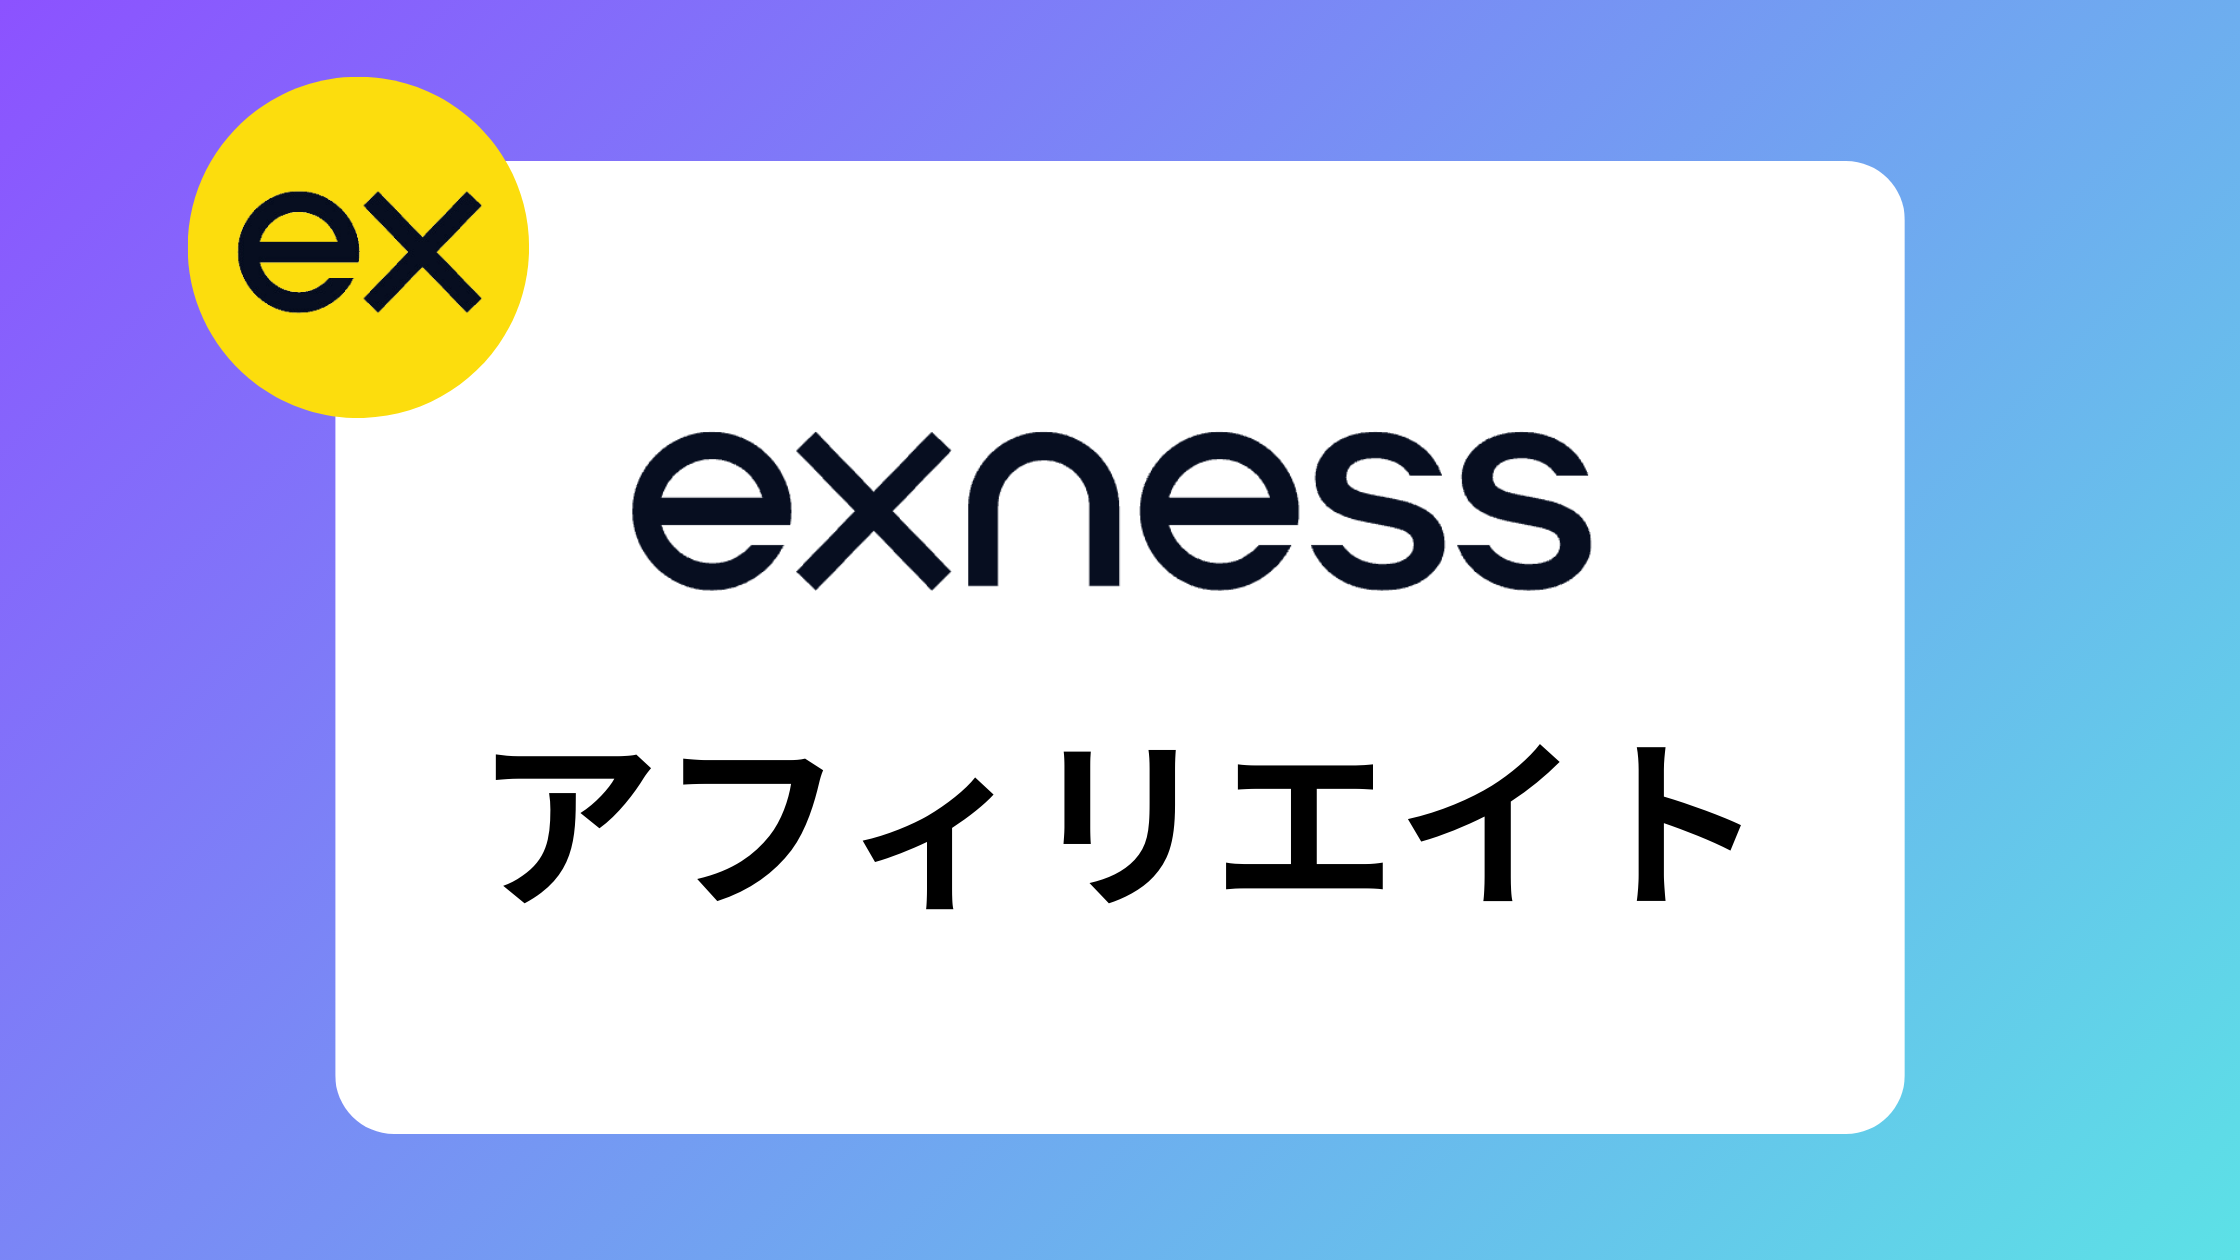 Are You Exness Indonesia Login The Right Way? These 5 Tips Will Help You Answer